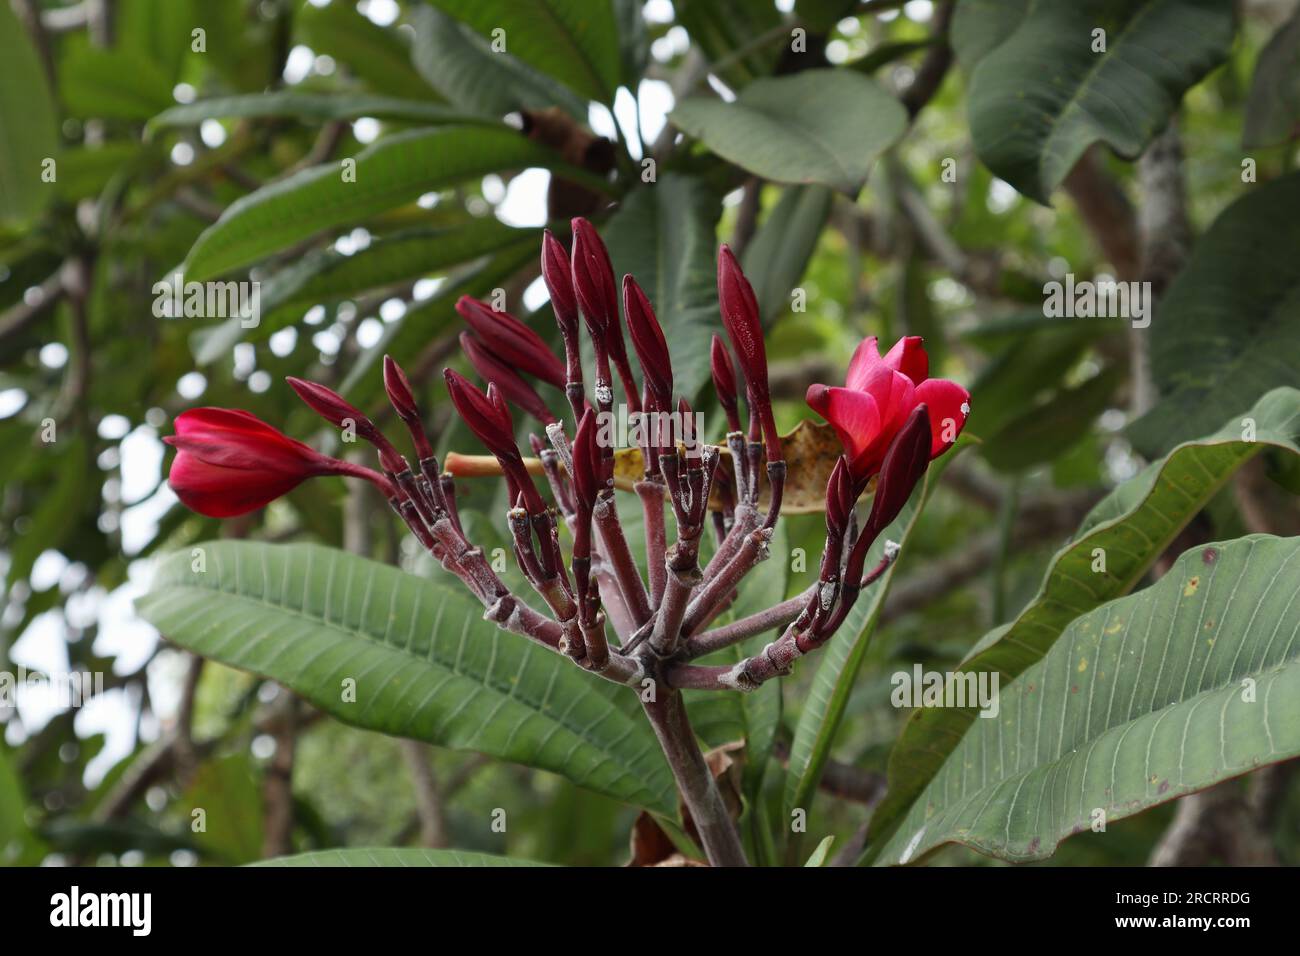 A red Frangipani (Plumeria) flower cluster with the several flower buds ready to bloom Stock Photo